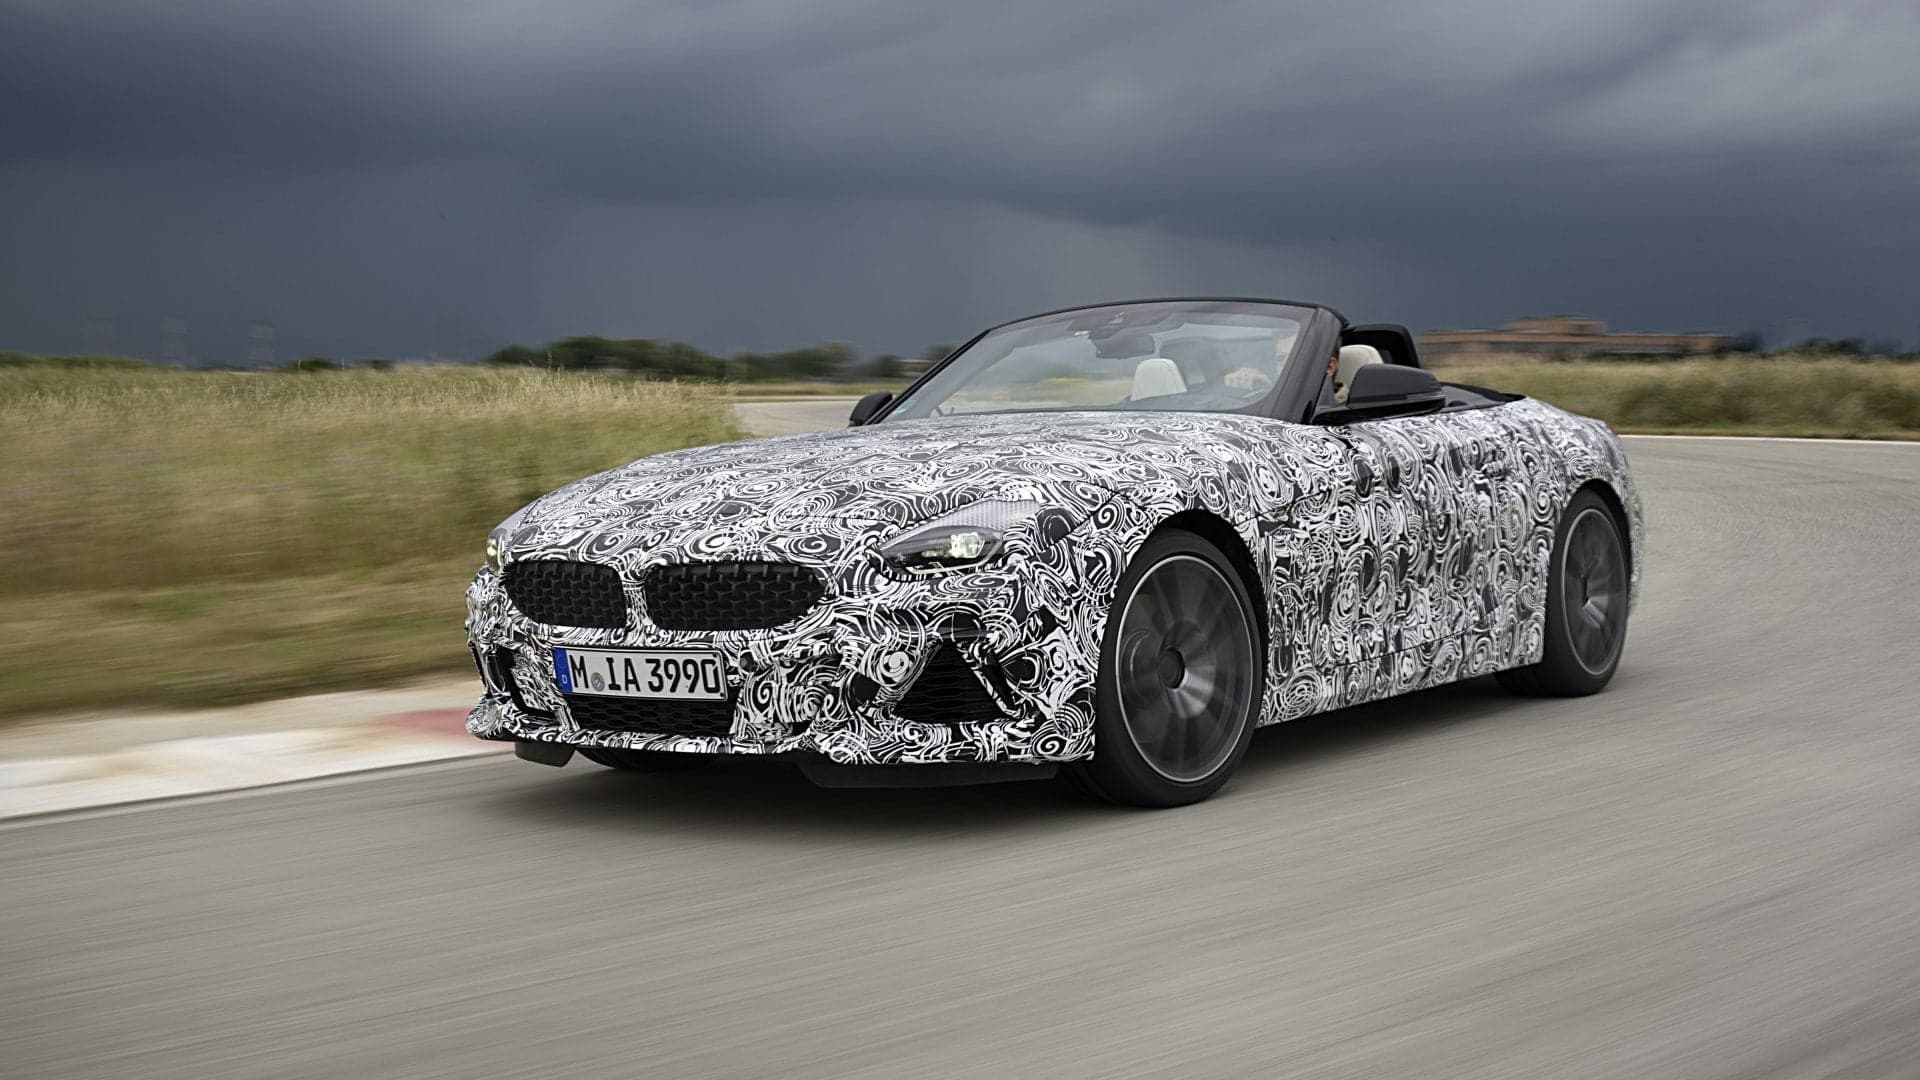 2019 BMW Z4 Enters Production in Q4, Toyota Supra Reportedly With It